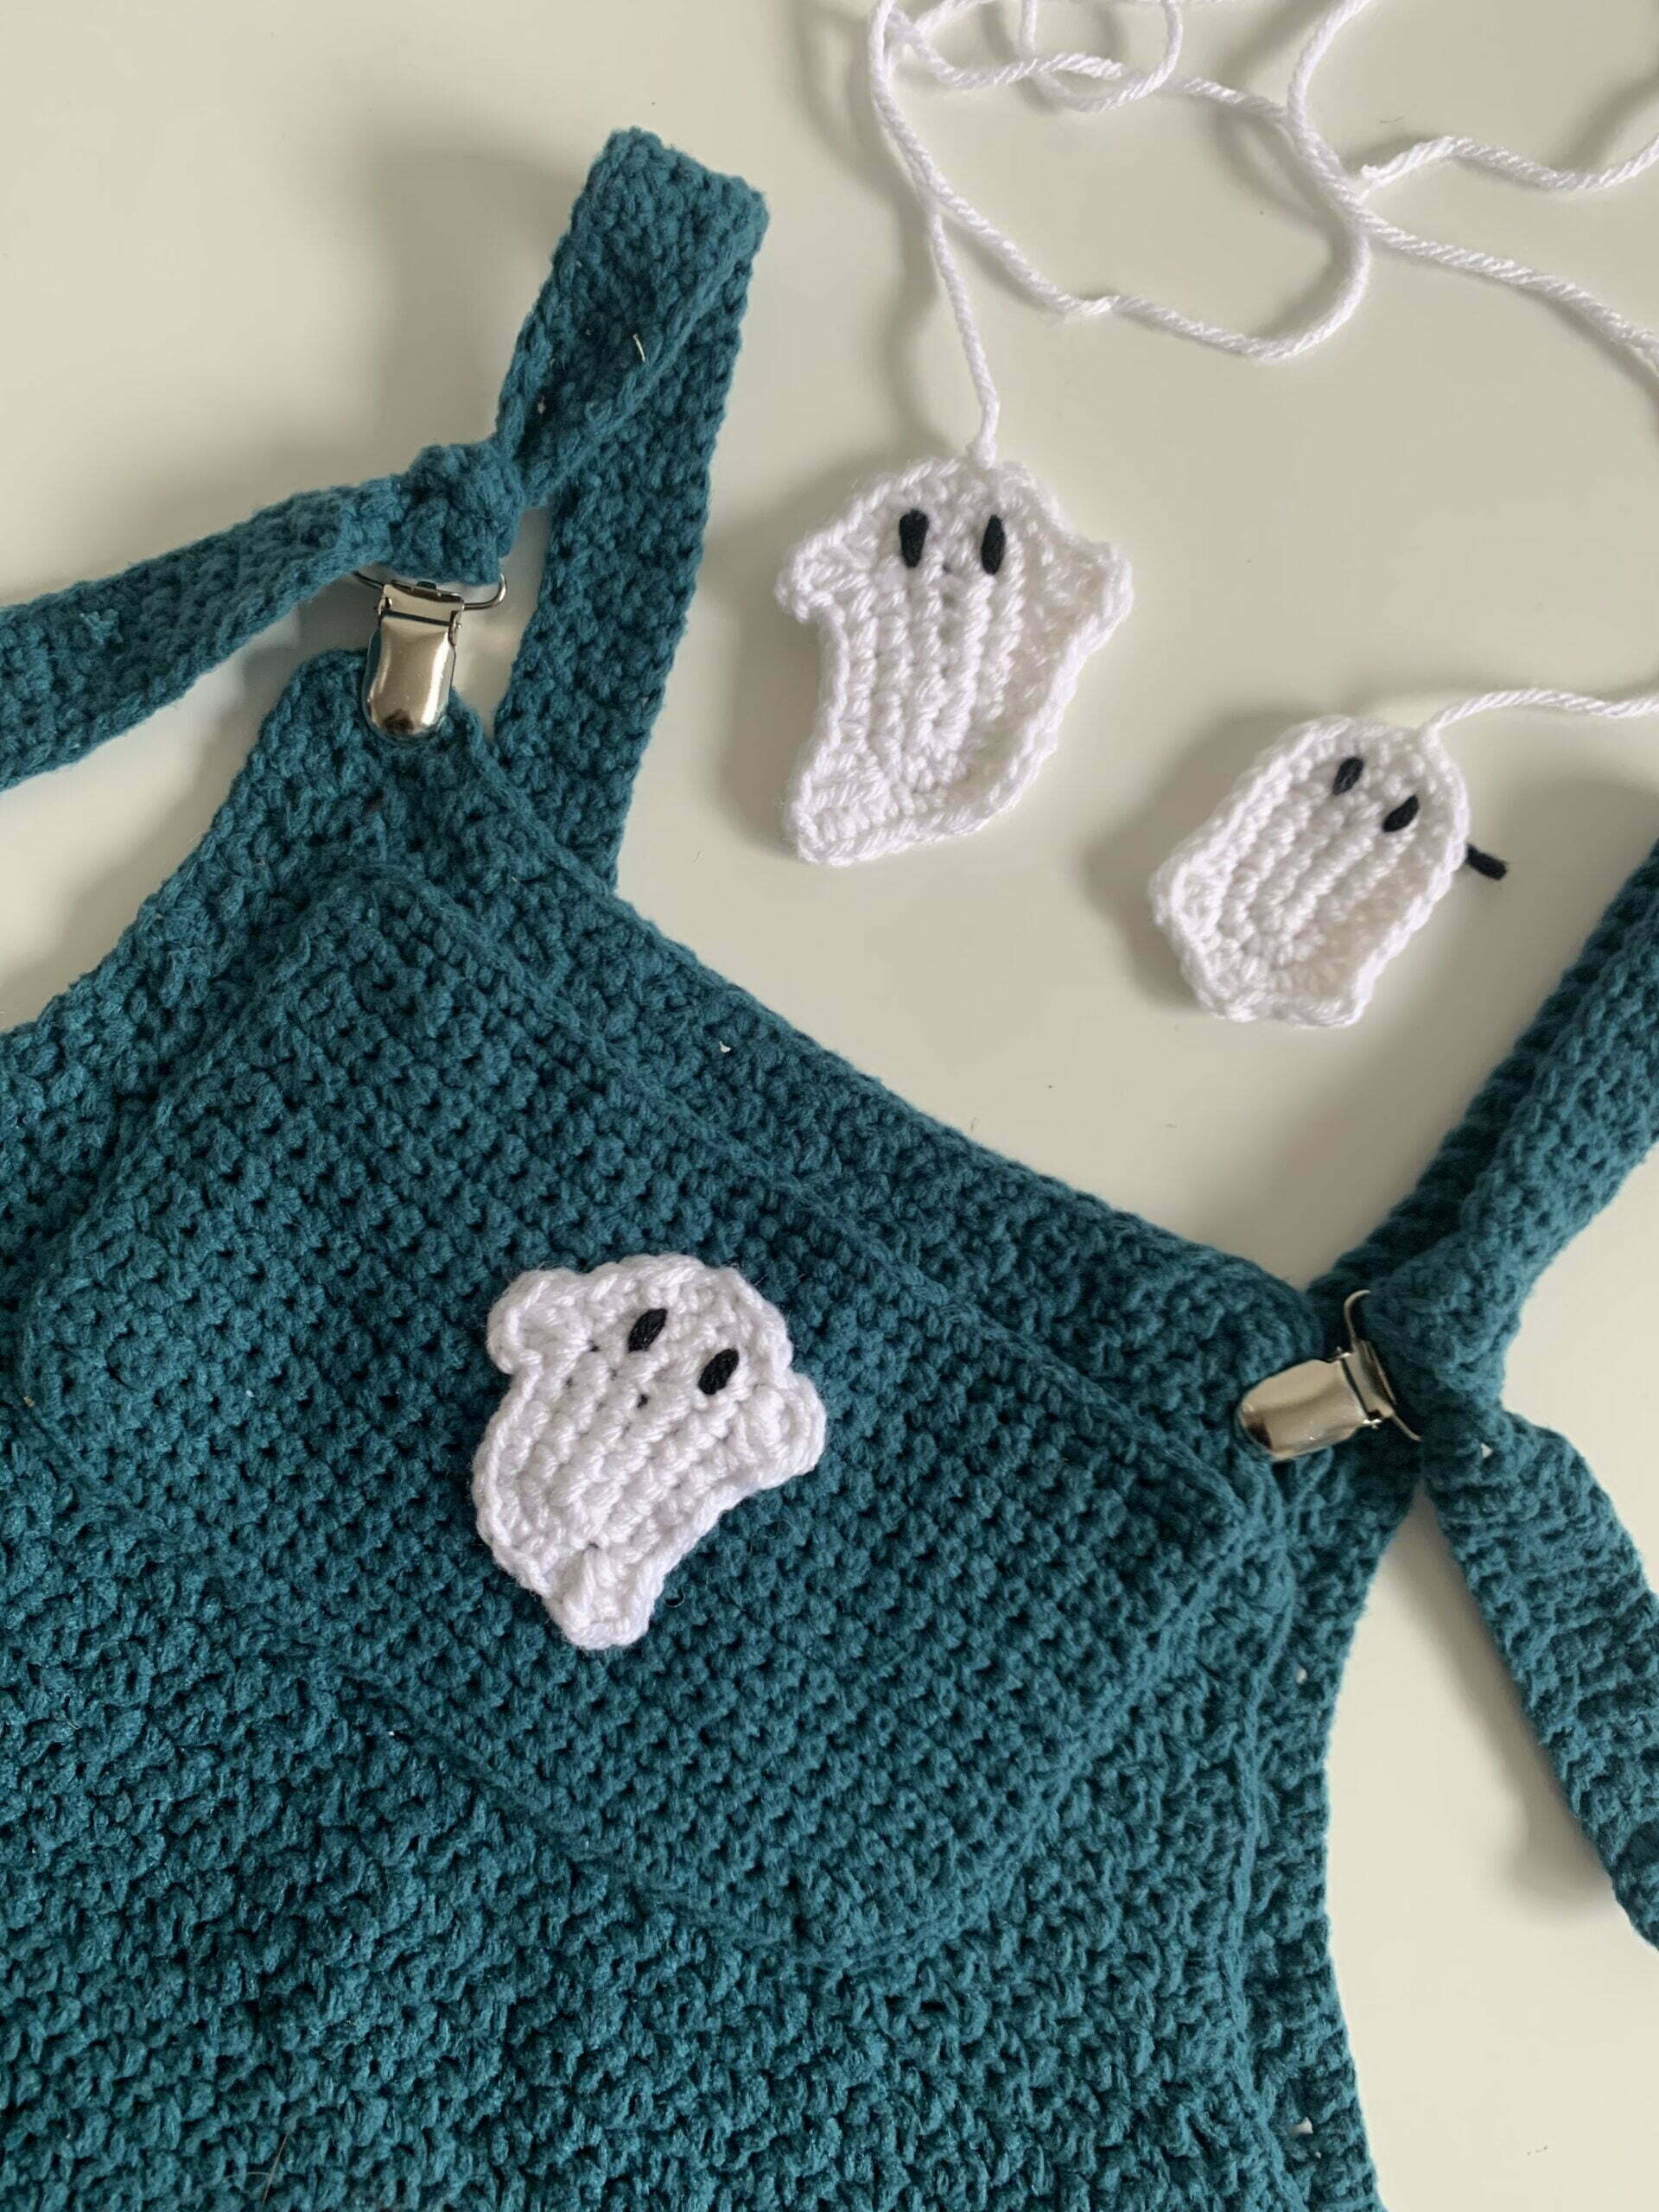 8 Spooky Crochet Halloween Projects to Haunt Your Home - Easy